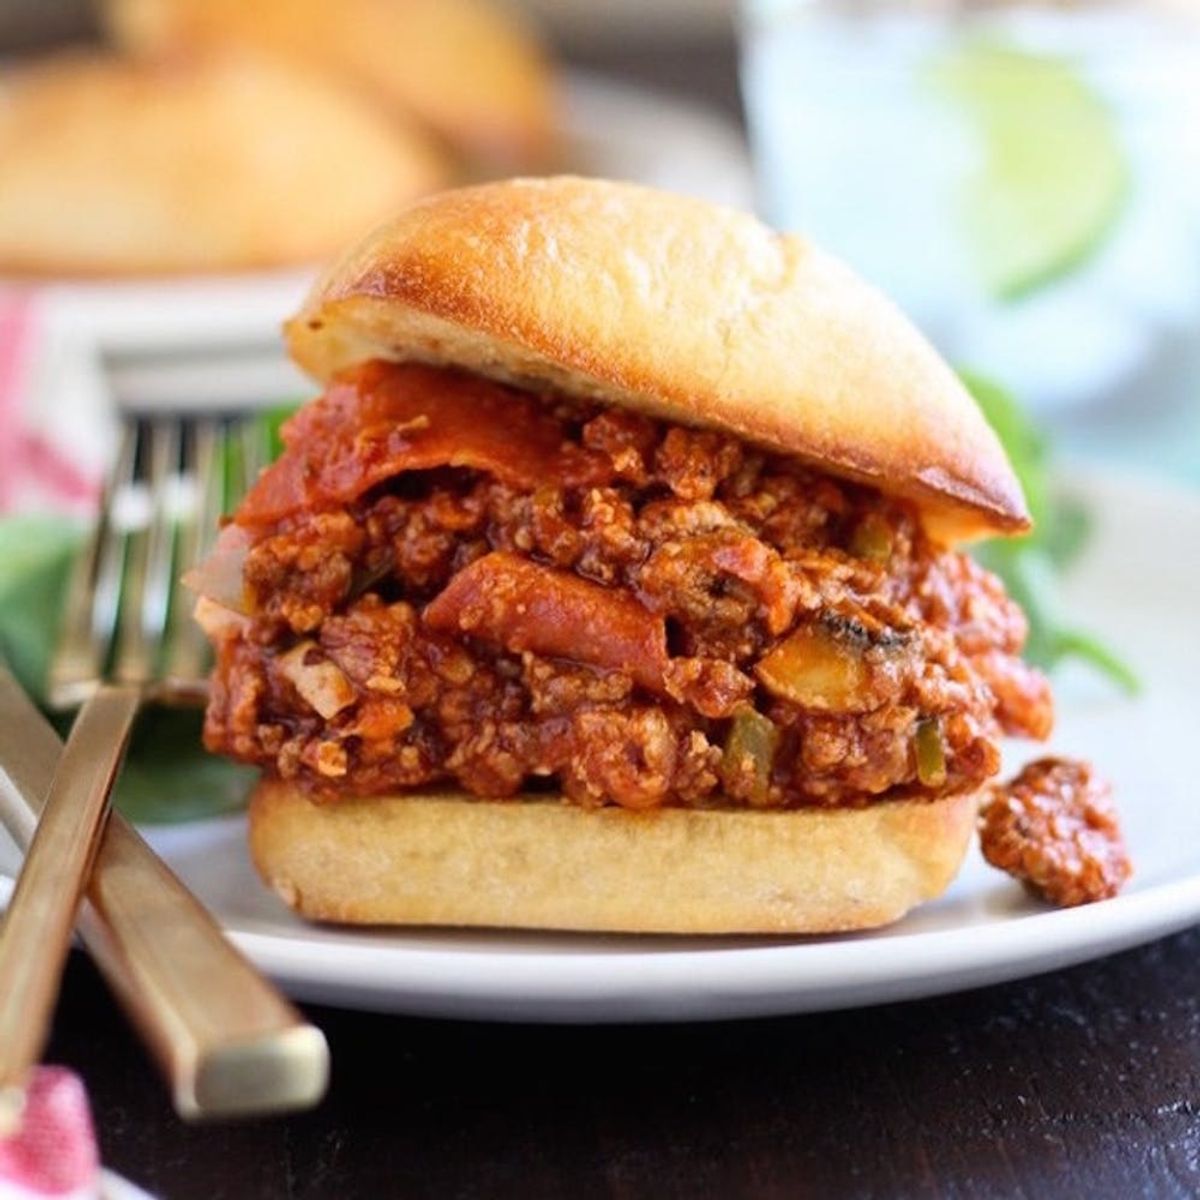 20 Recipes That Give a New Twist to the Classic Sloppy Joe